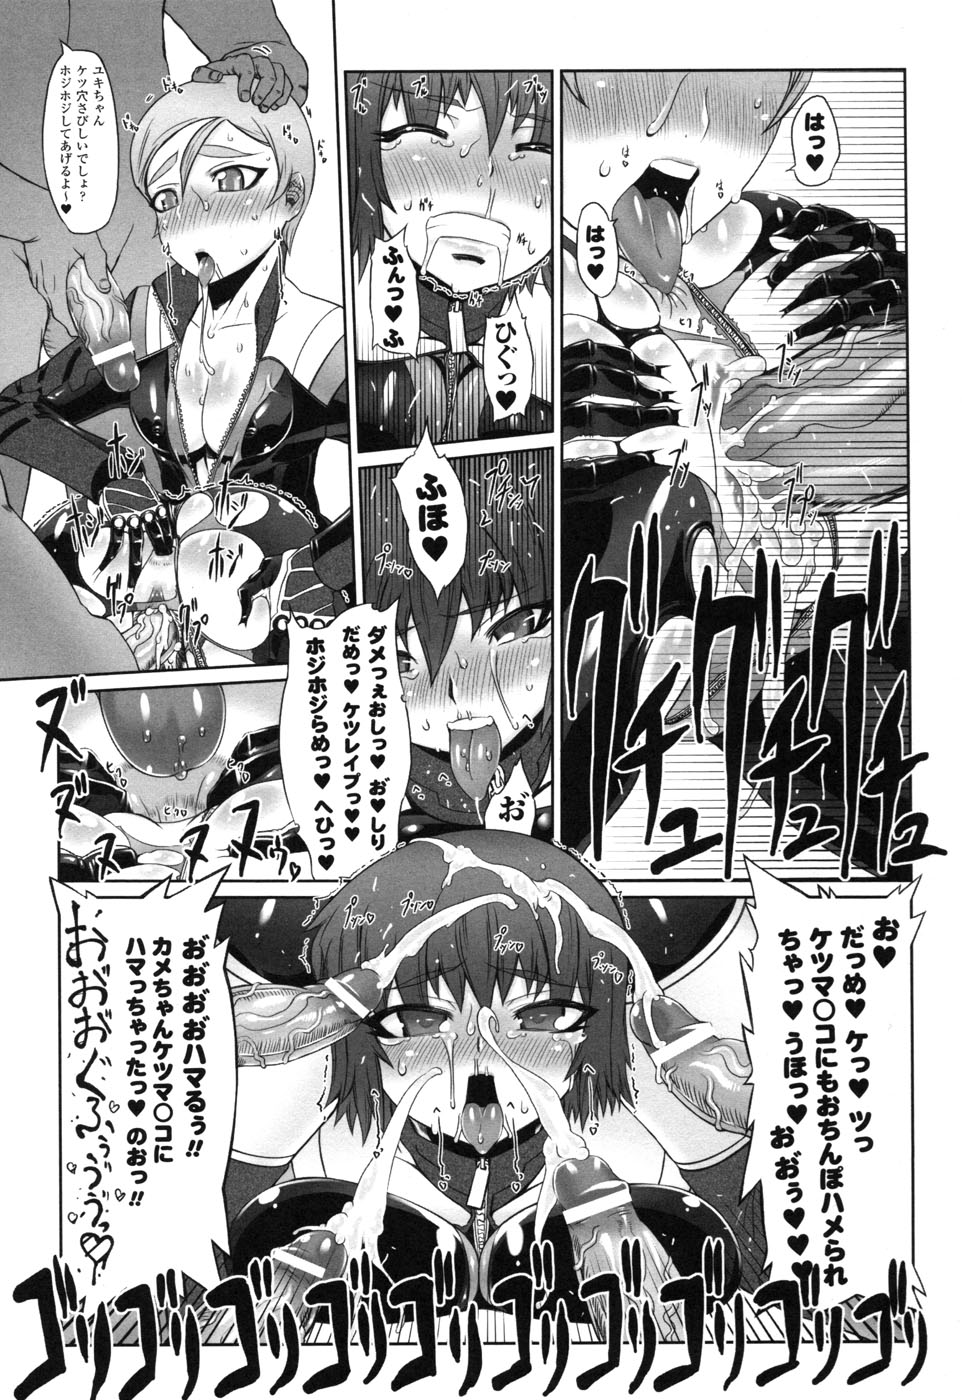 Rider Suit Heroine Anthology Comics 2 page 43 full